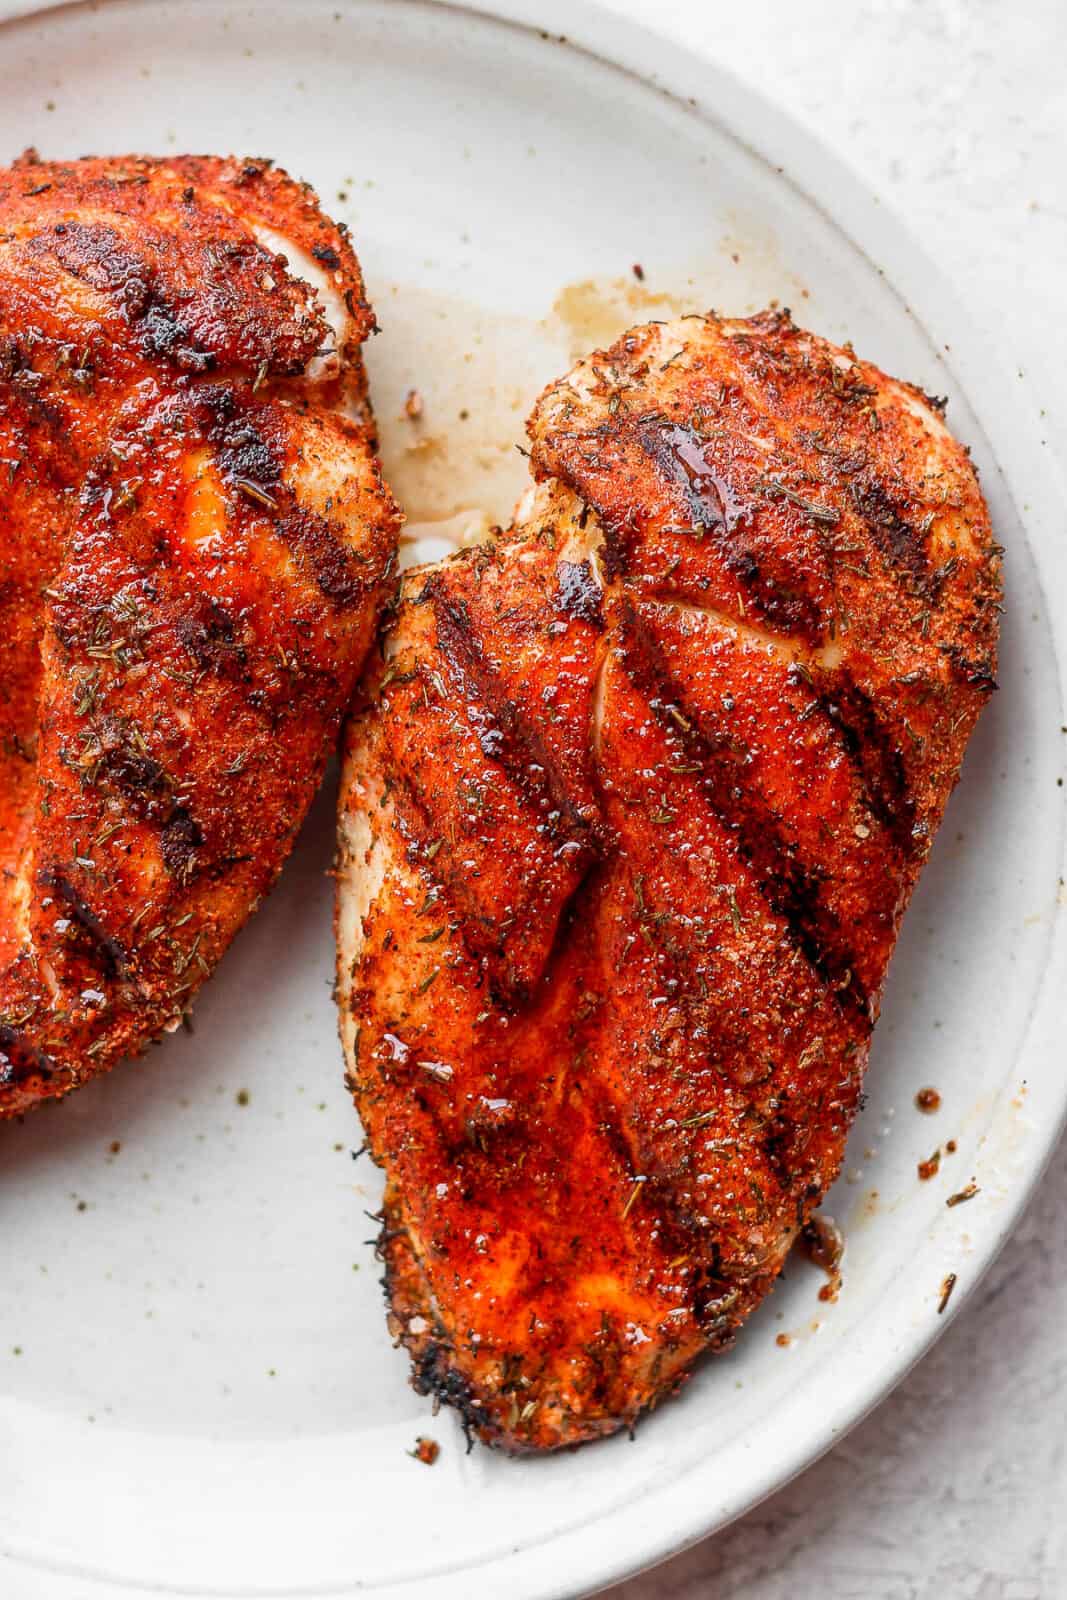 Seasoned chicken breasts that were grilled on a plate.